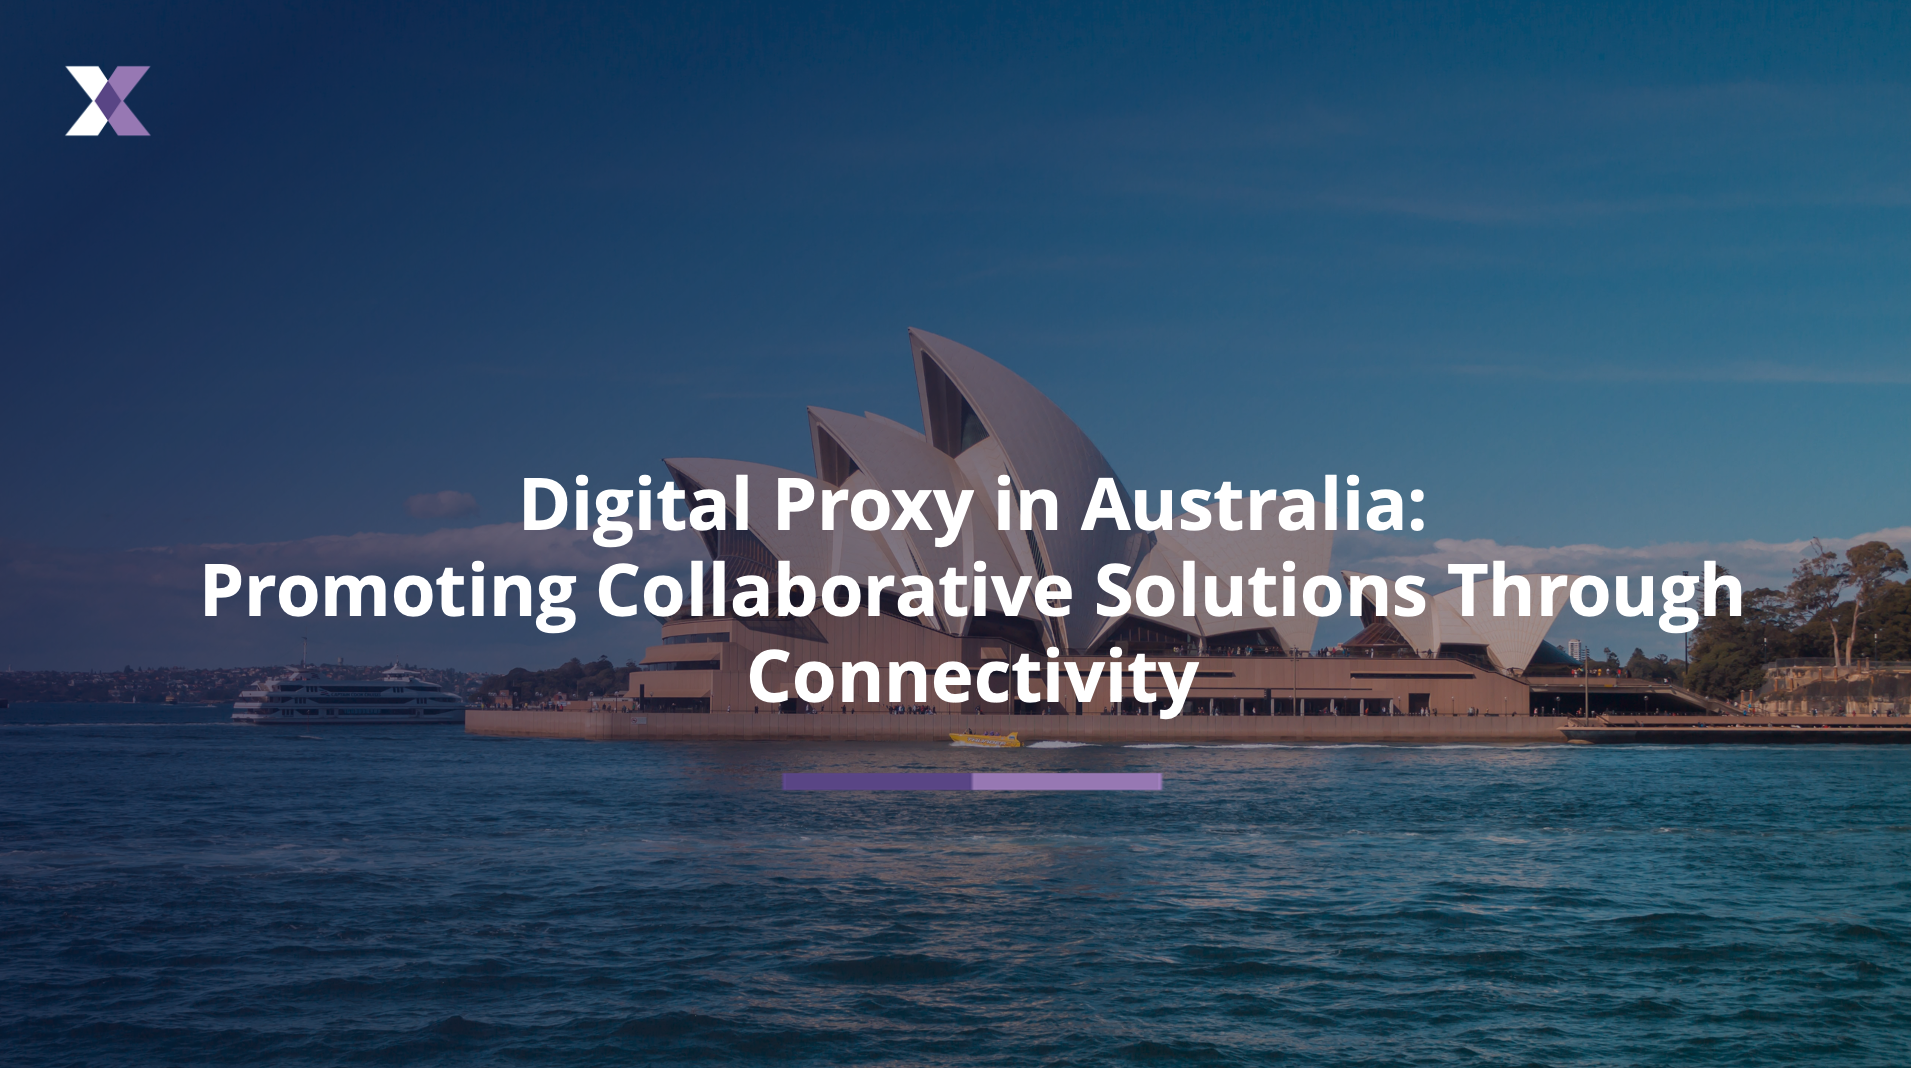 Digital Proxy in Australia: ​ Promoting Collaborative Solutions Through Connectivity​ ​ ​ ​ ​